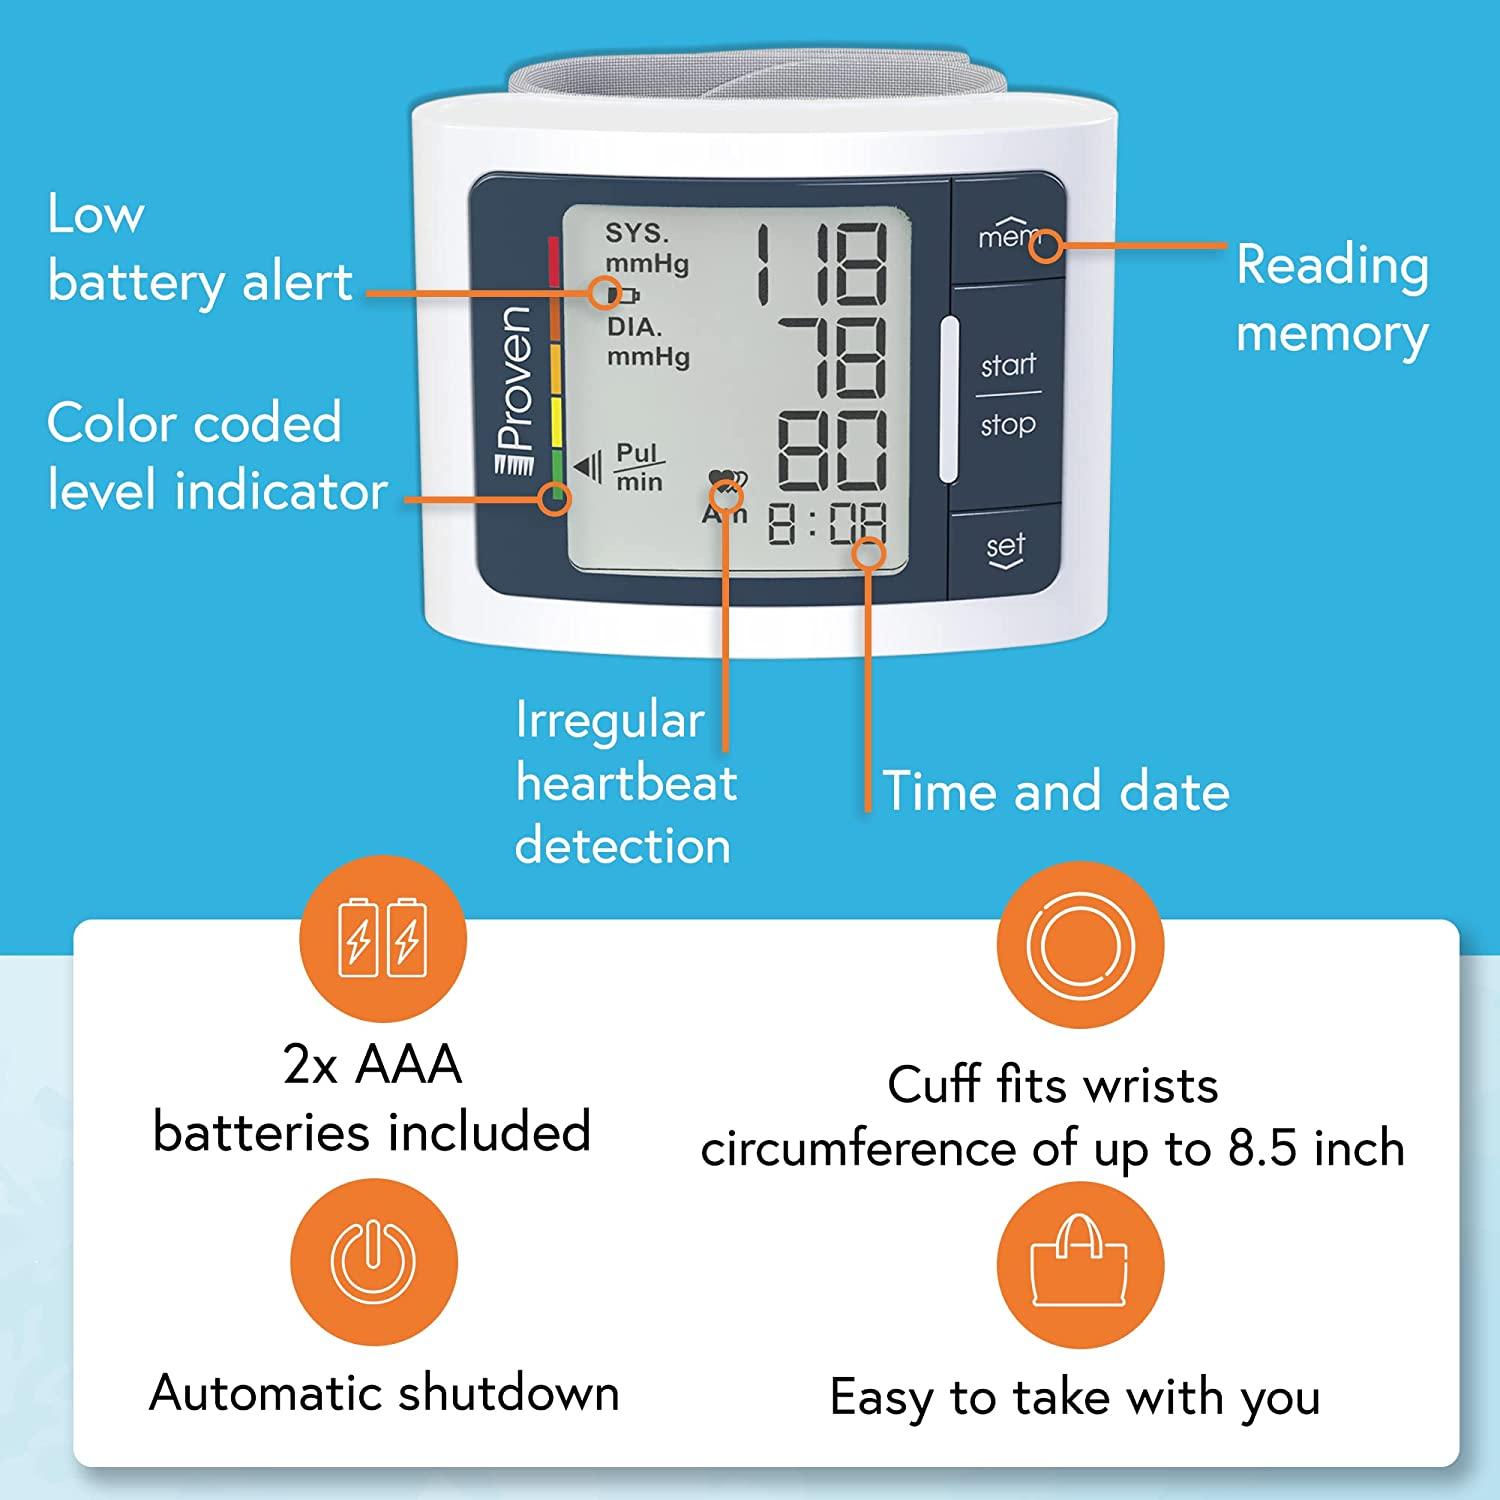 IPROVEN New 2023 Smart Upper Arm Blood Pressure Monitor - Home Use, 500  Memory Sets - Large Adjustable Cuff - Largest Widescreen Backlit Display -  Bluetooth App for iOS & Android